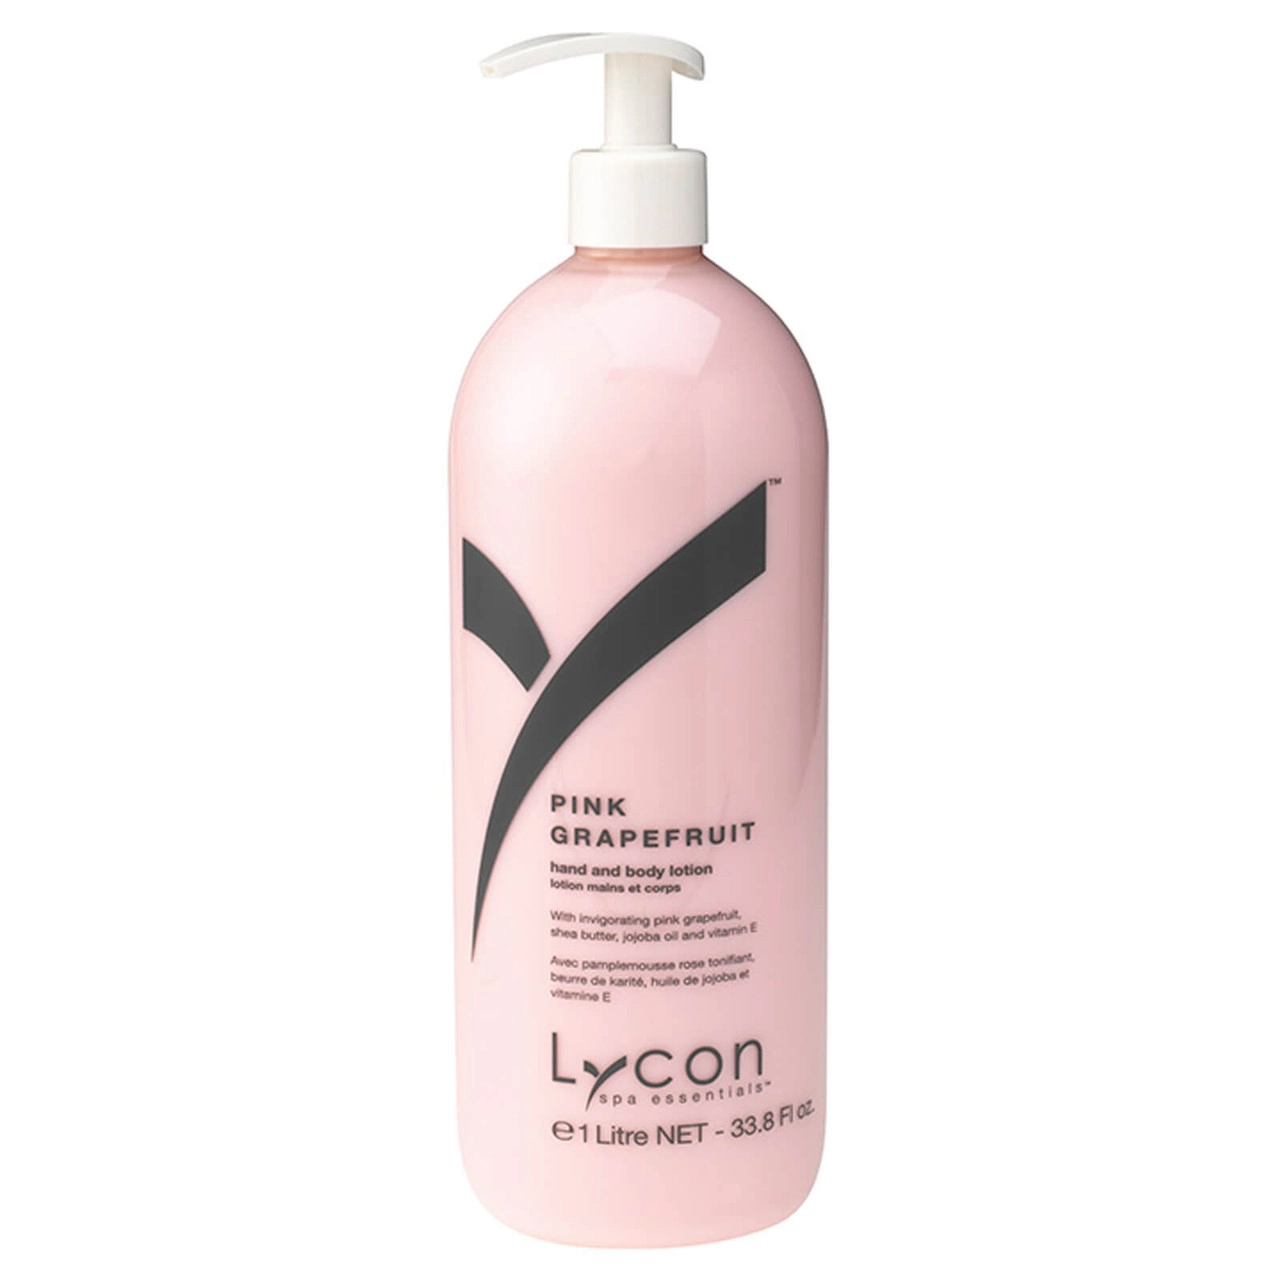 lycon_pink_grapefruit_hand_and_body_lotion_-1l__95772